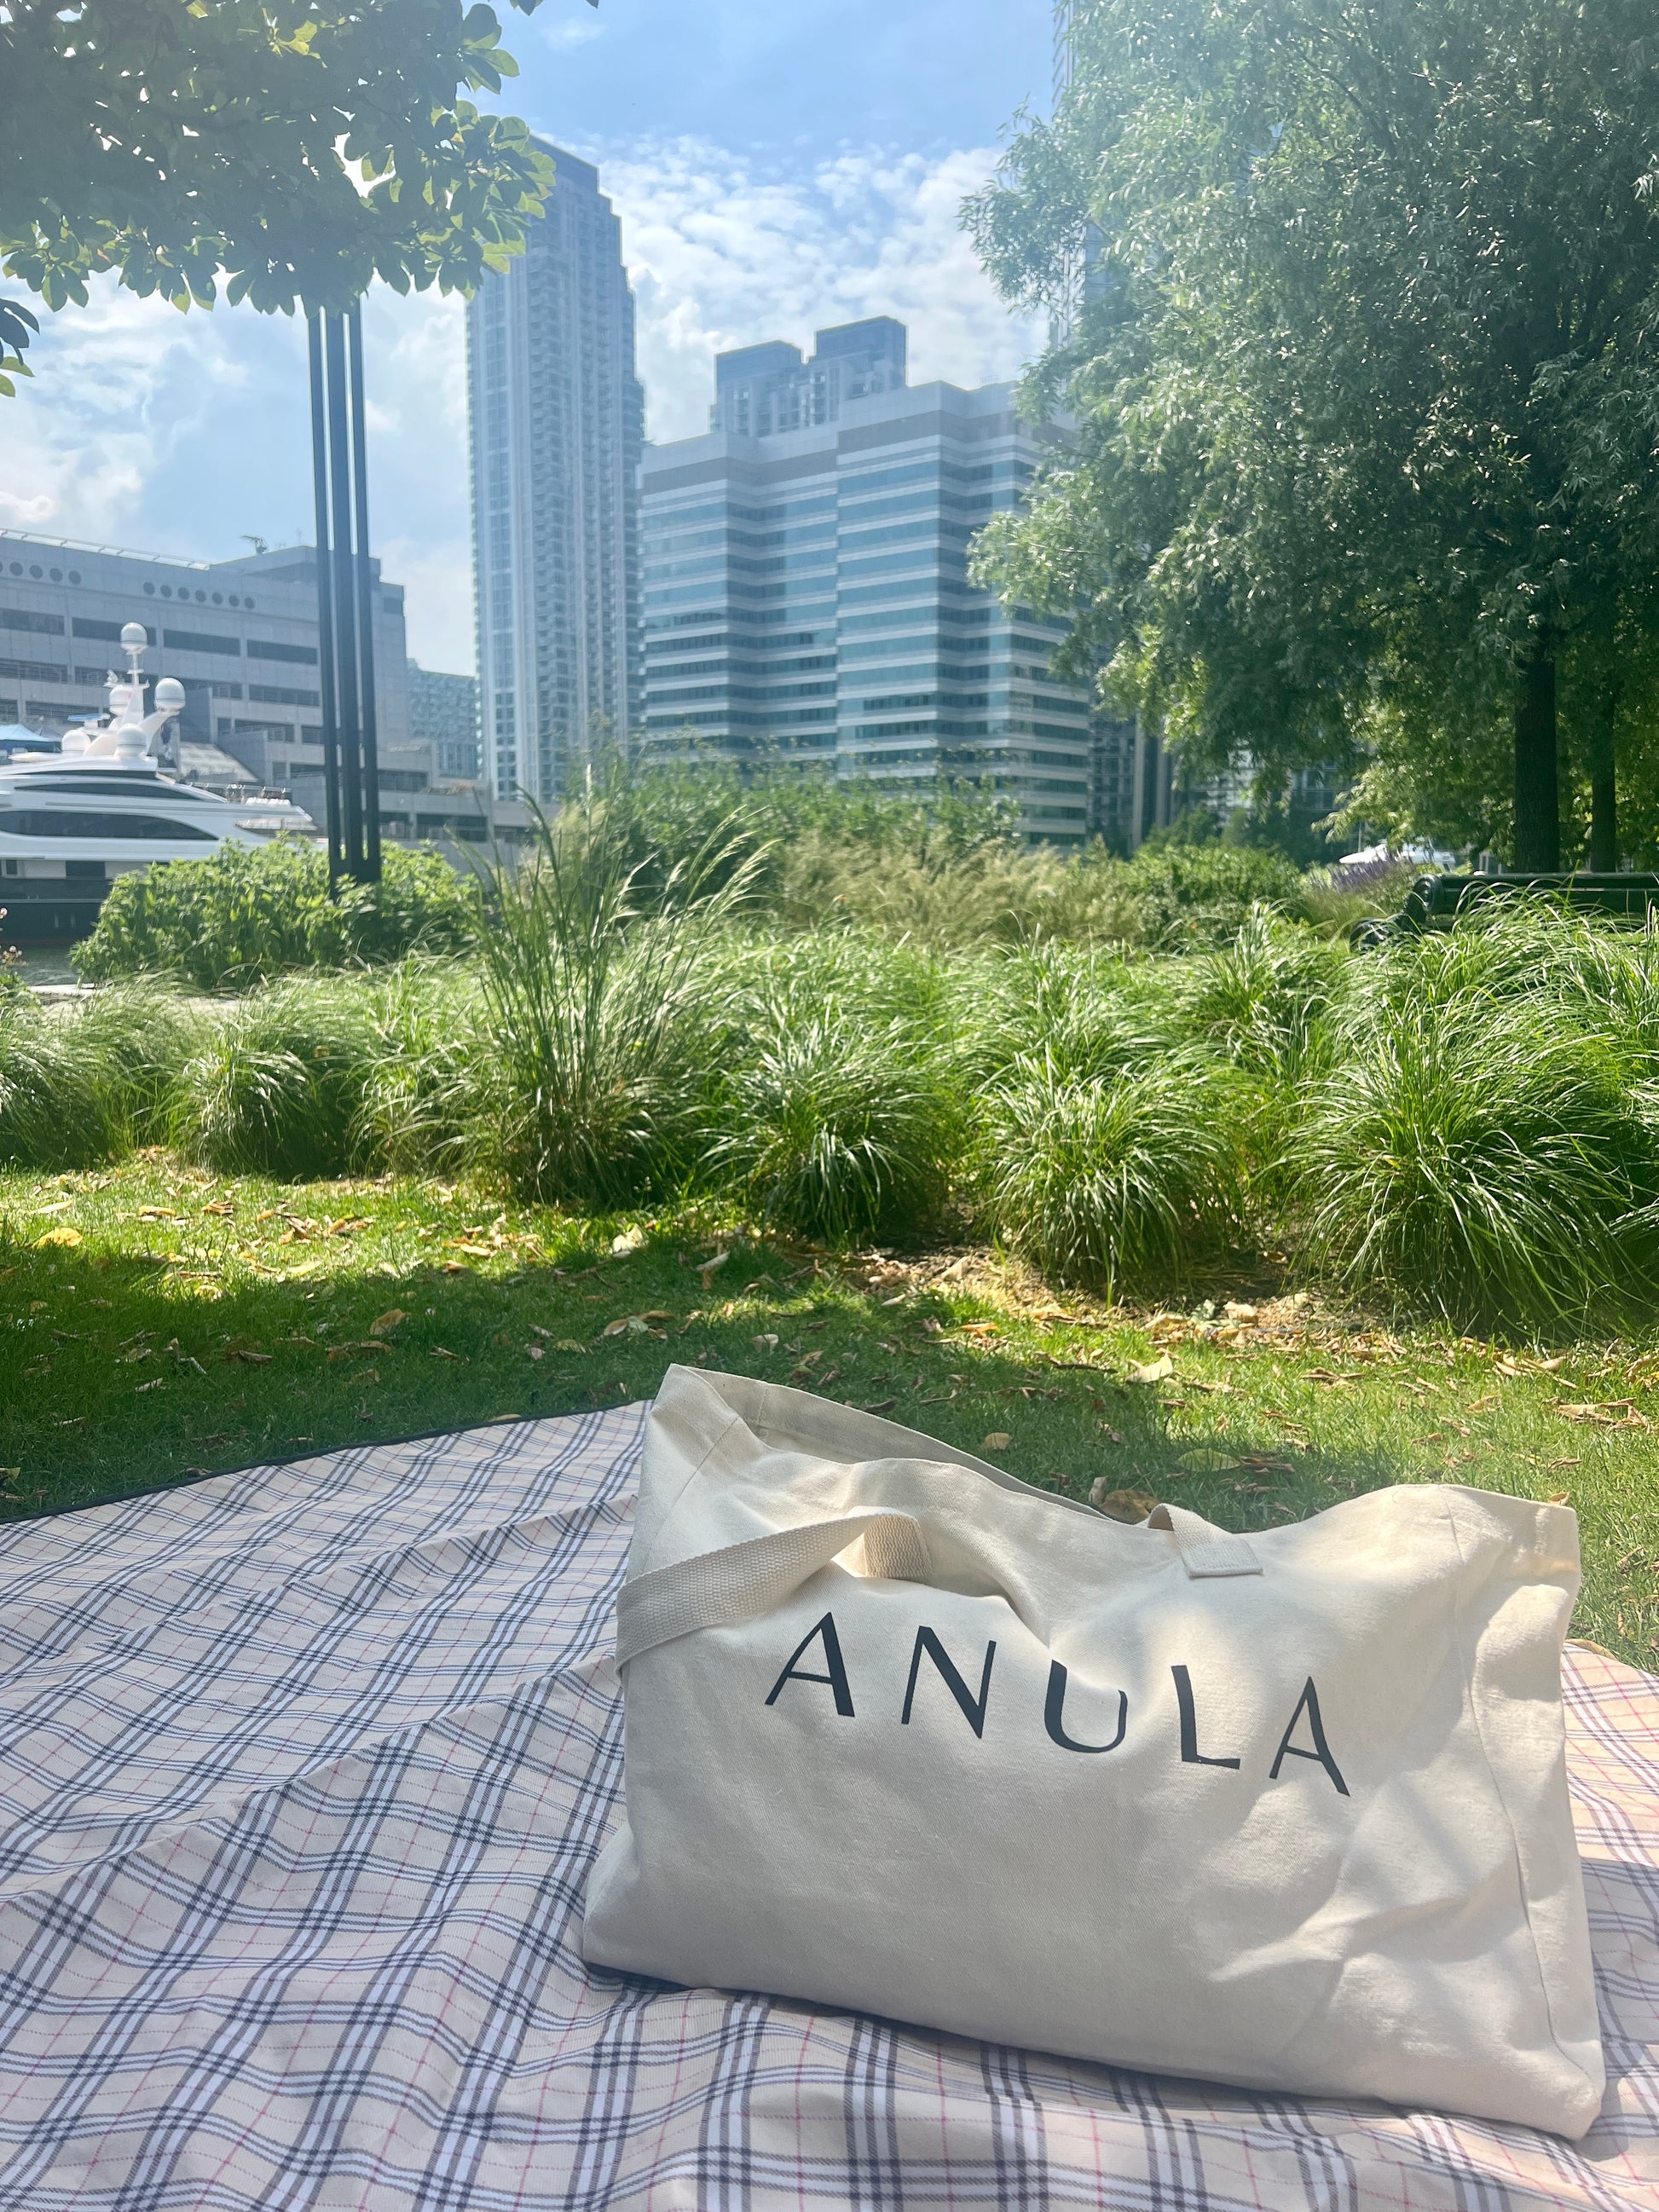 ANULA tote bag on picnic rug with grass and cityscape behind